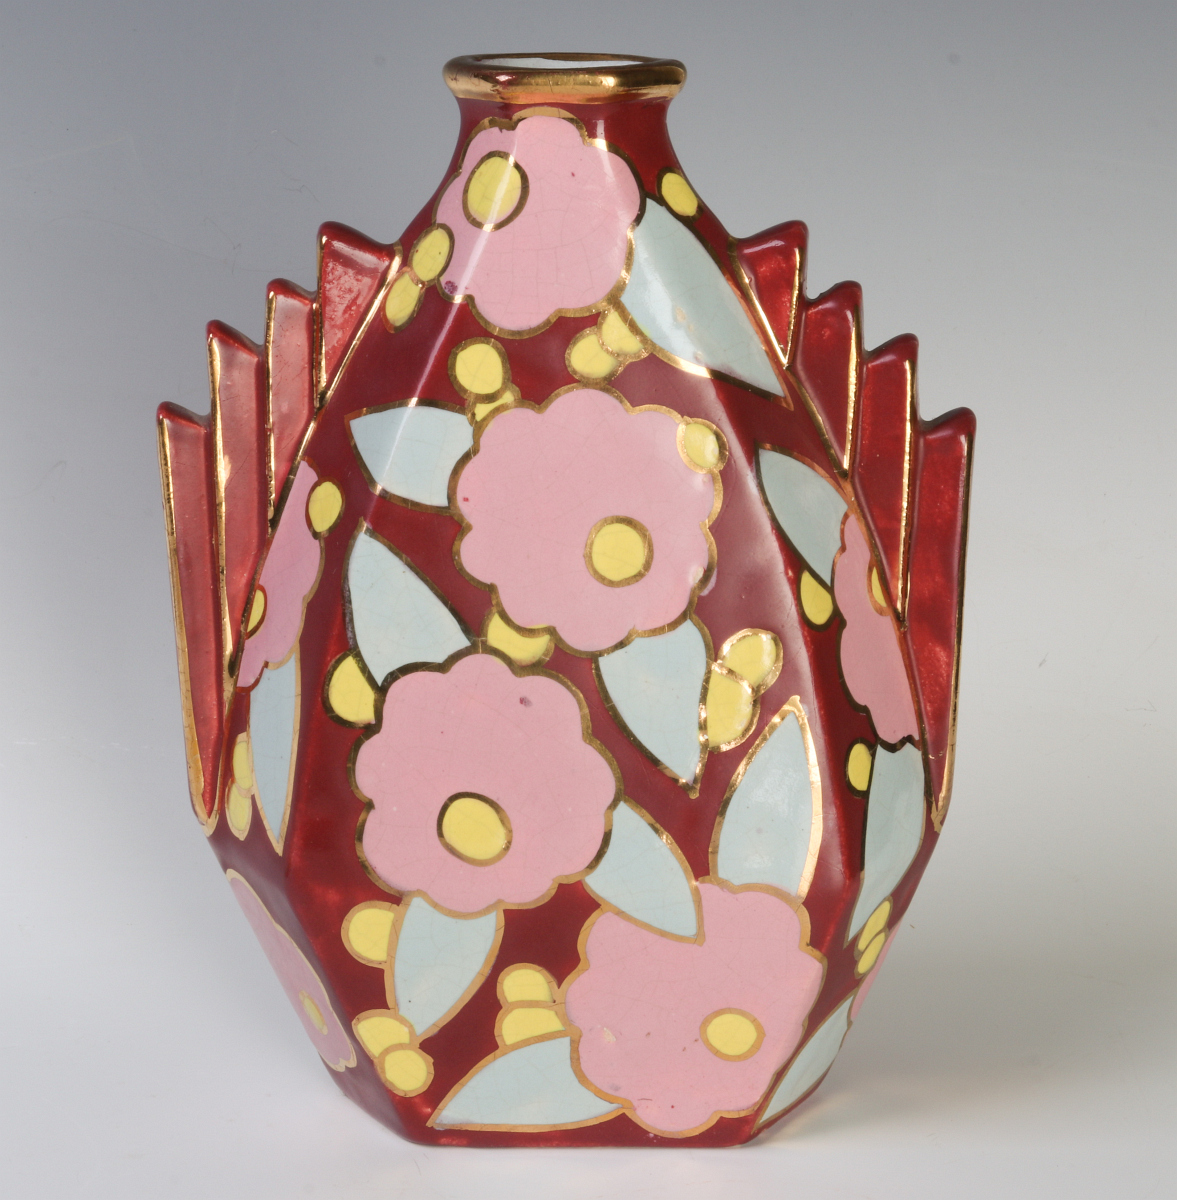 A PURE ART DECO POTTERY VASE MADE IN BELGIUM